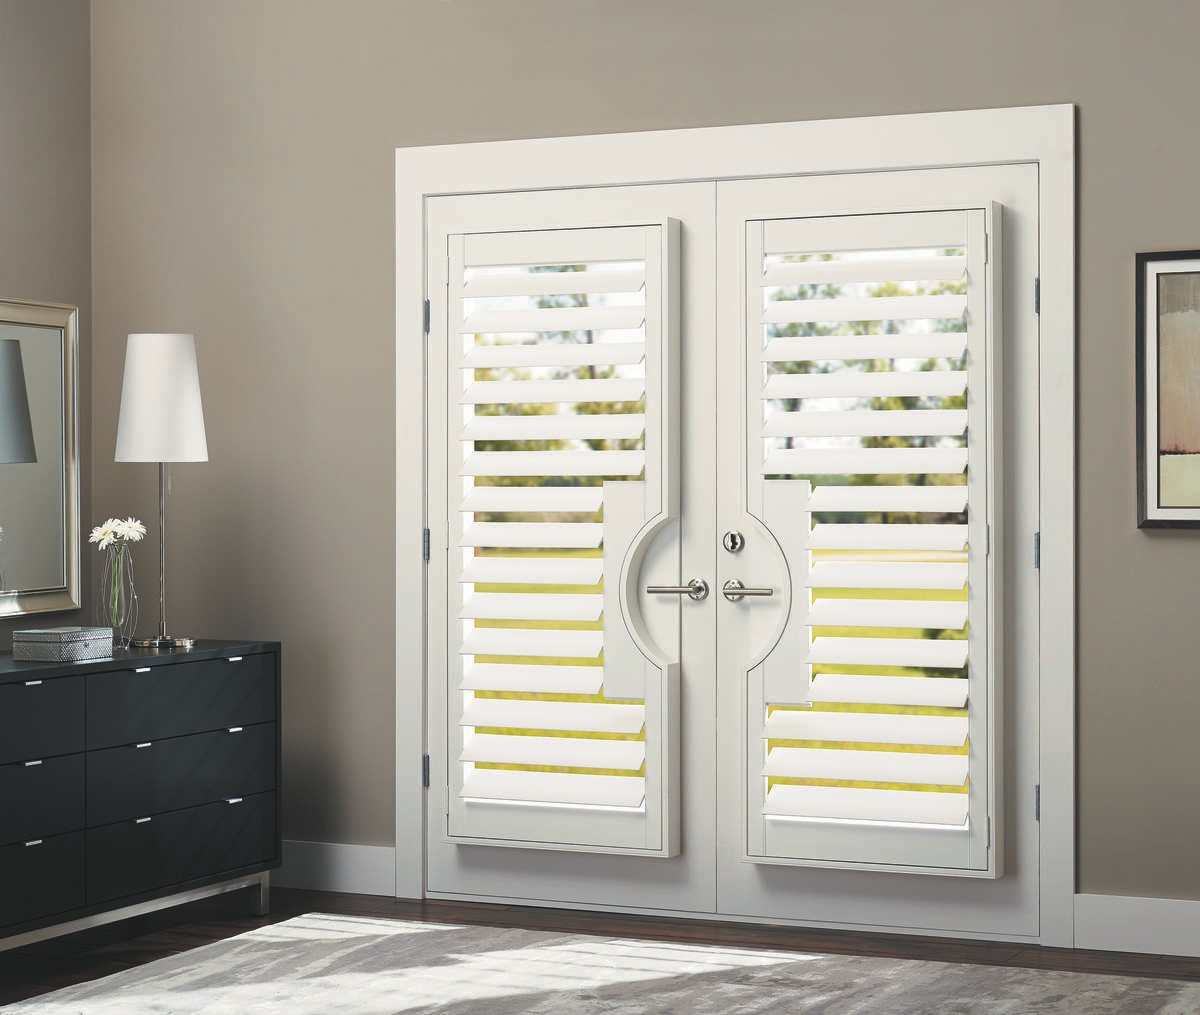 Heritance® Hardwood Shutters near Gresham & Portland, Oregon (OR) with durability, beautiful color options, and more